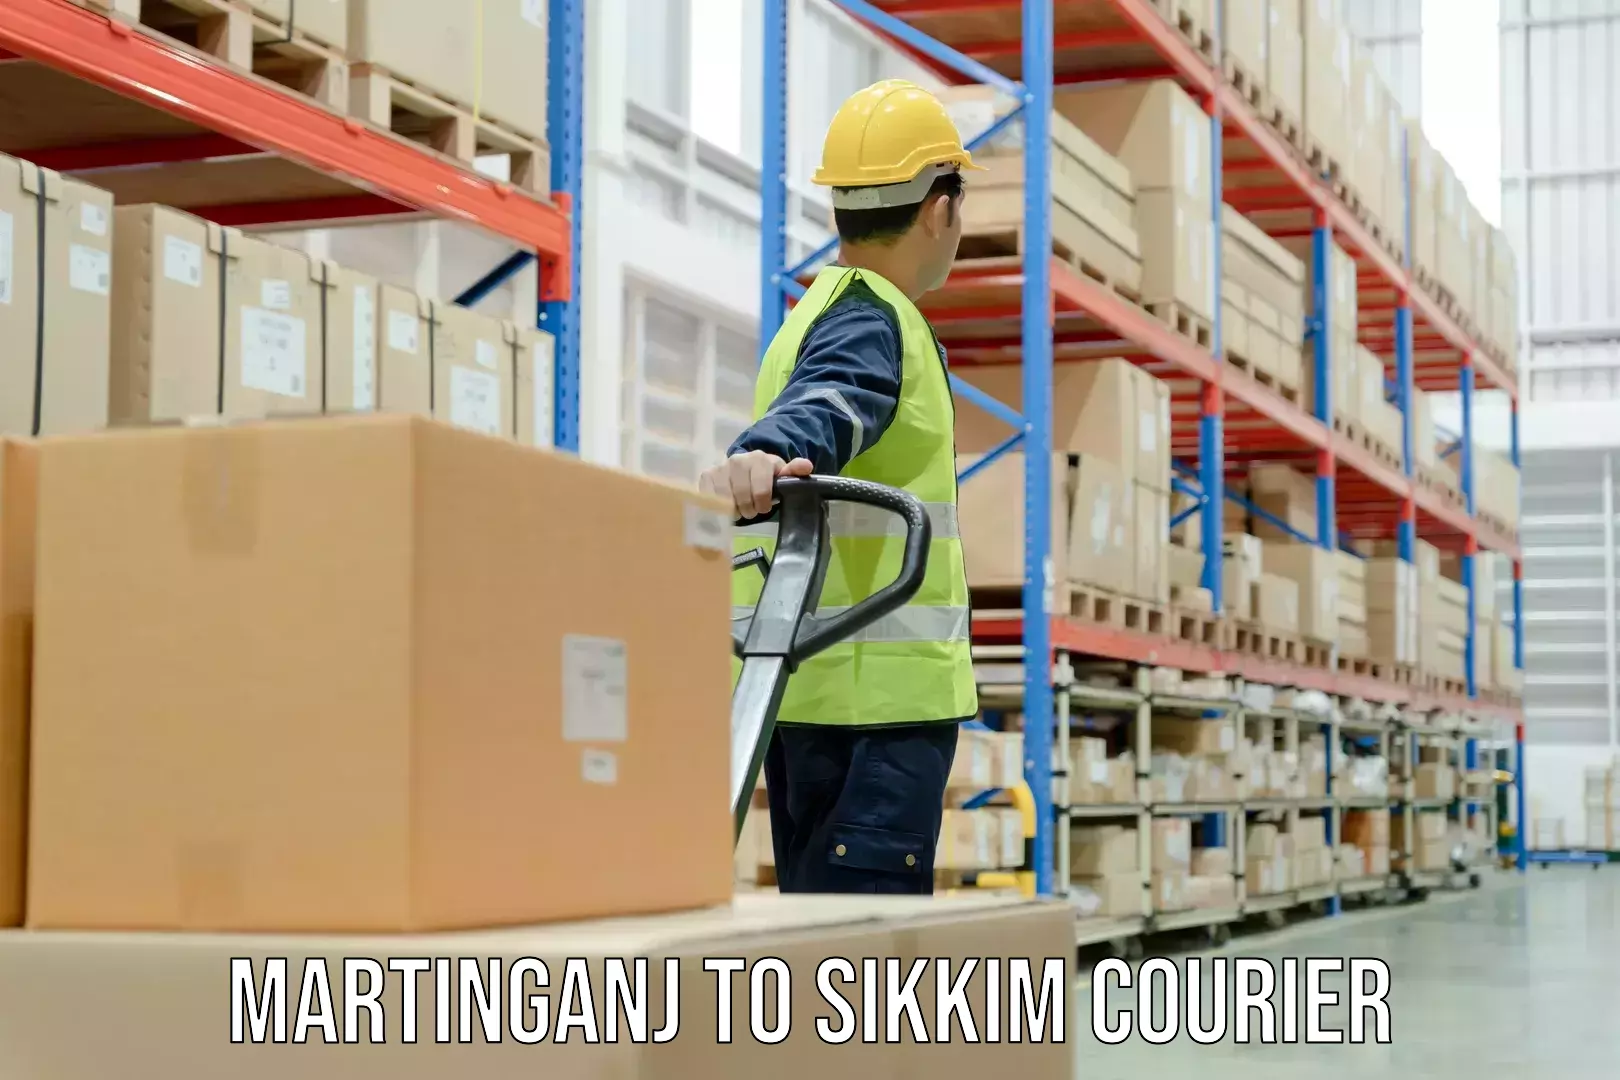 Sustainable courier practices Martinganj to Rangpo